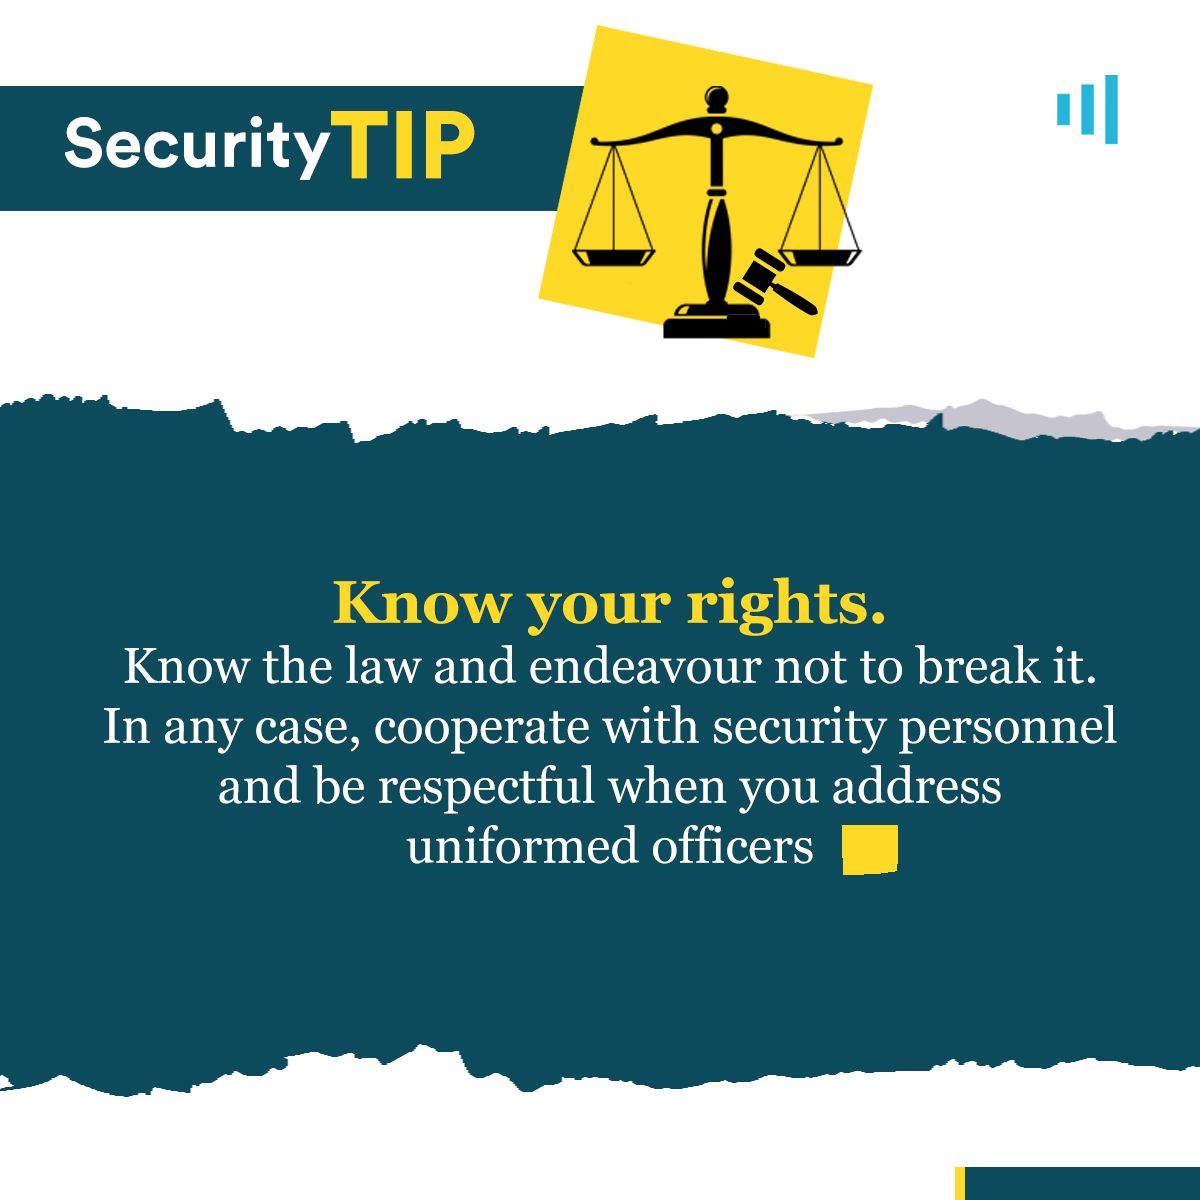 Security tip of the week: Protect yourself by knowing the law and knowing your rights. #HumAngleSecurityTip